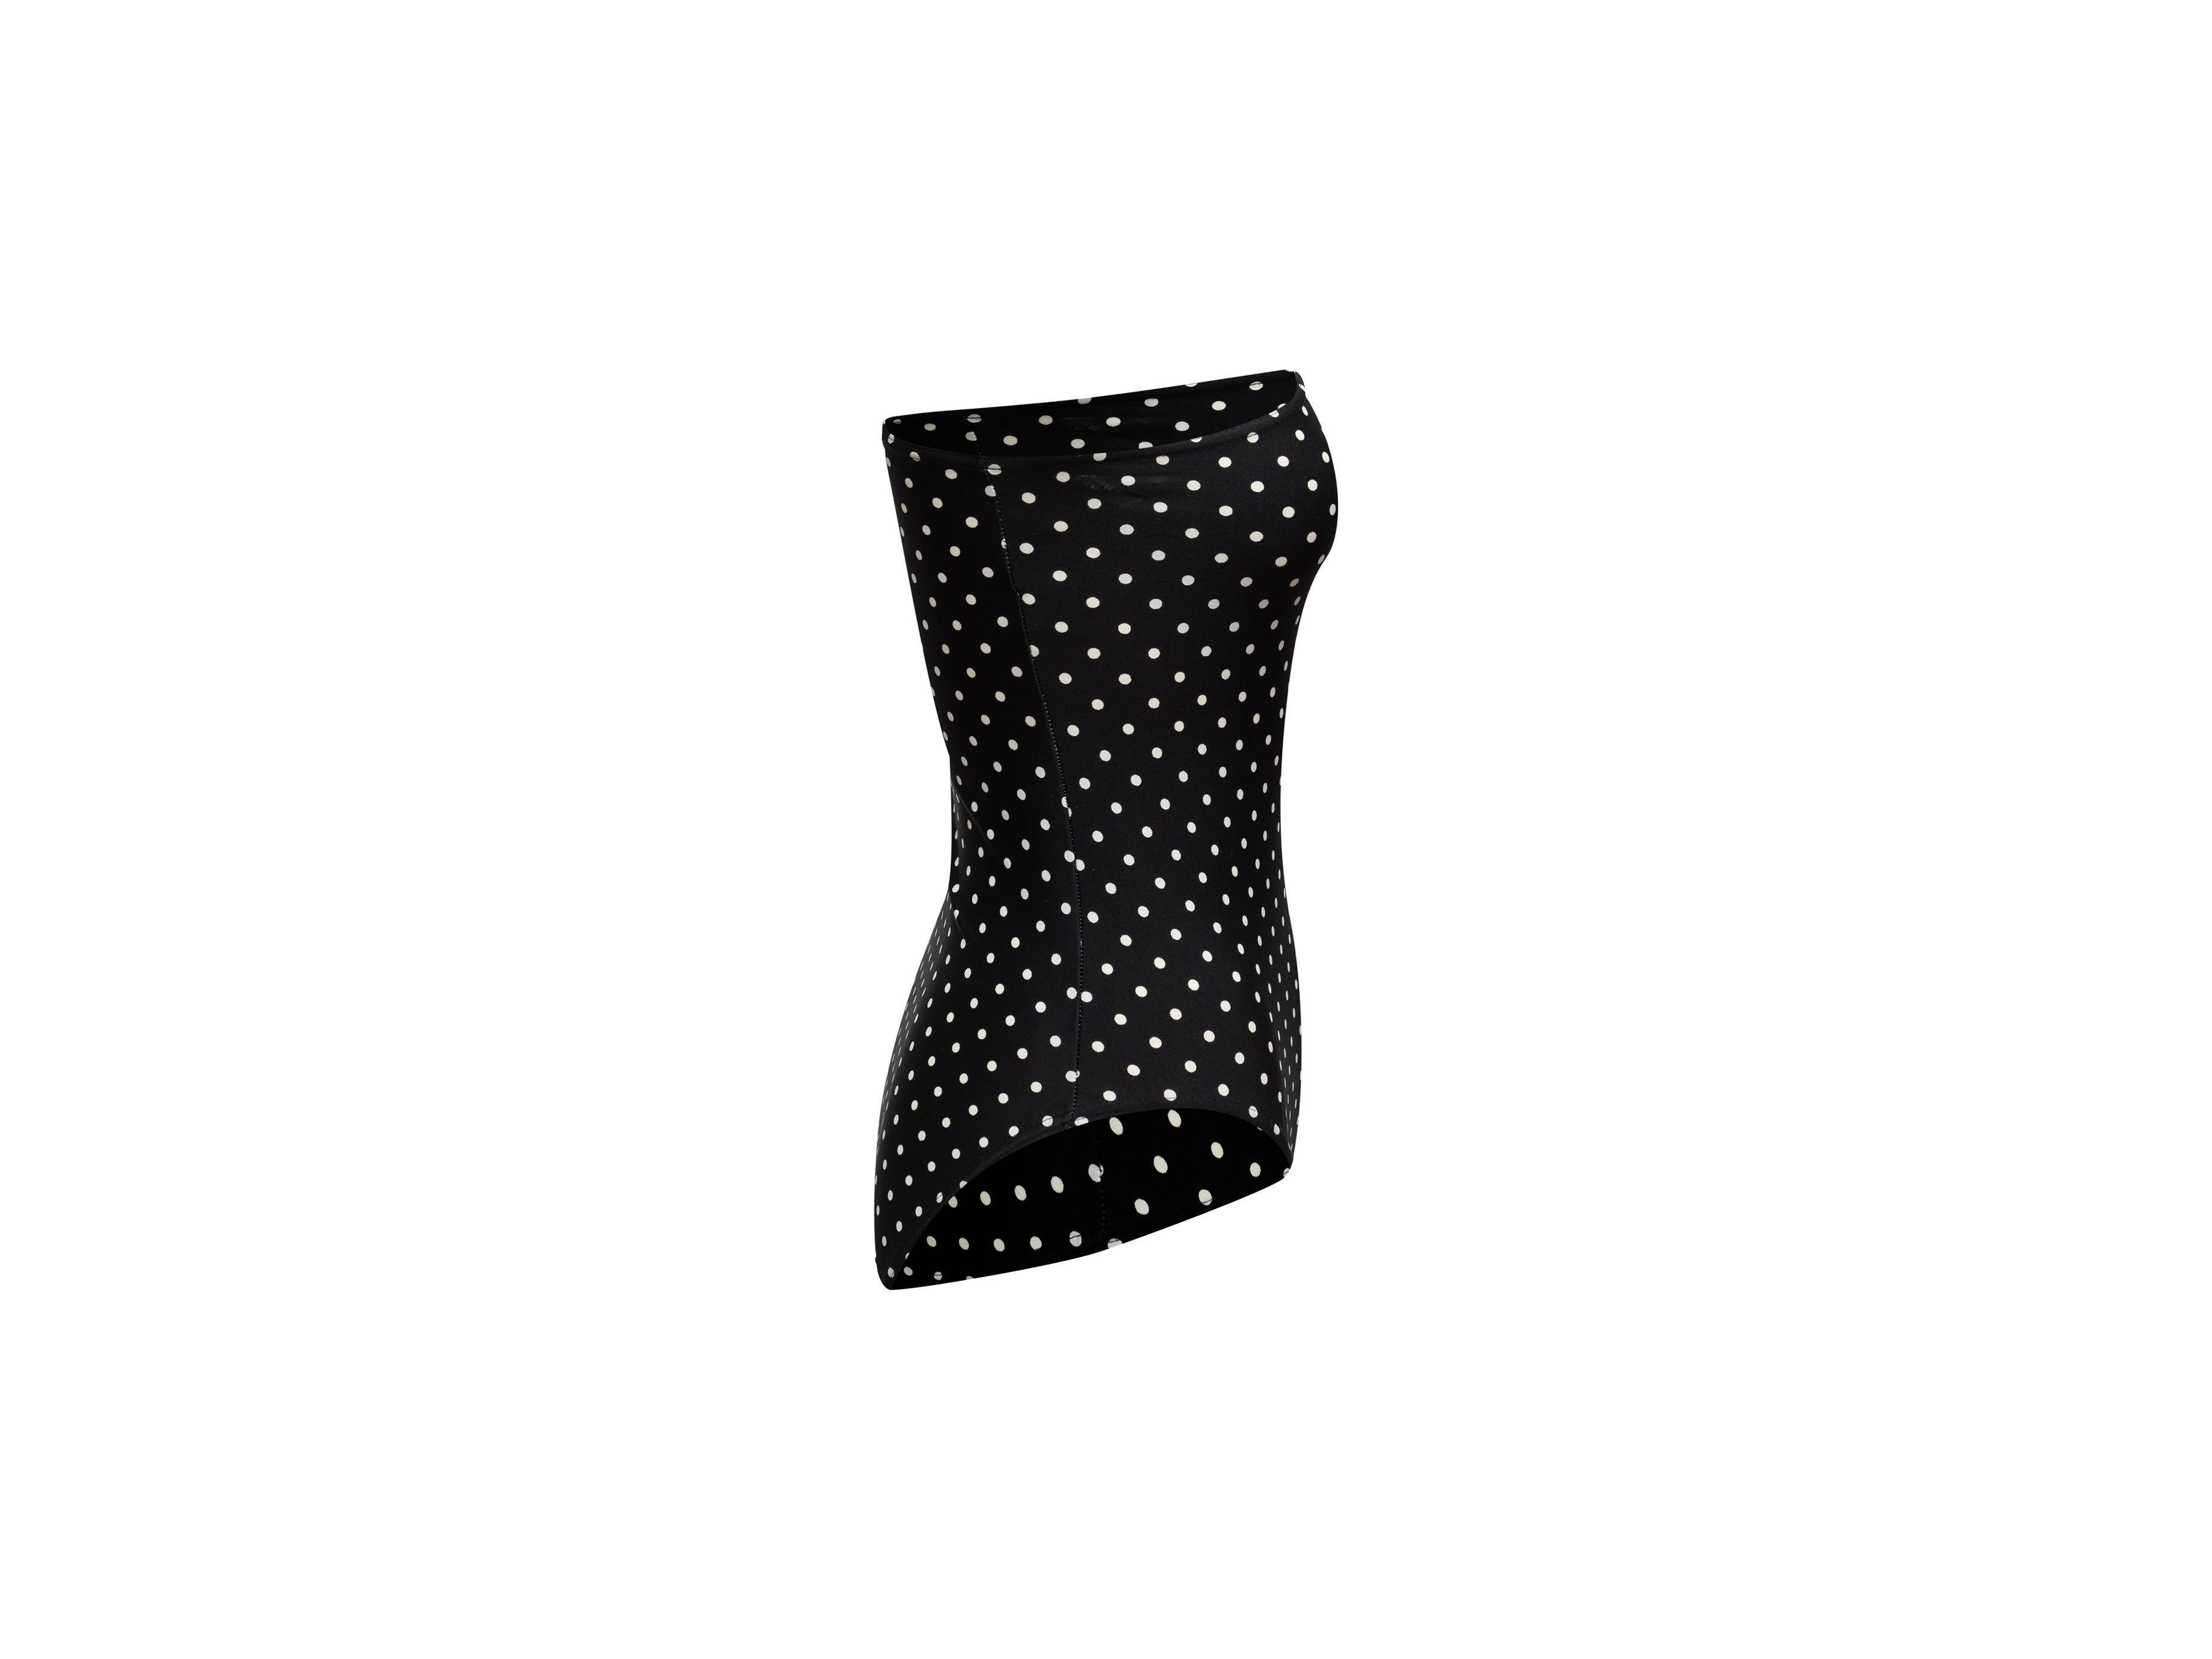 Product details: Vintage black and white one-piece swimsuit by Chanel. Polka dot print throughout. Single strap. Designer size 40. 23